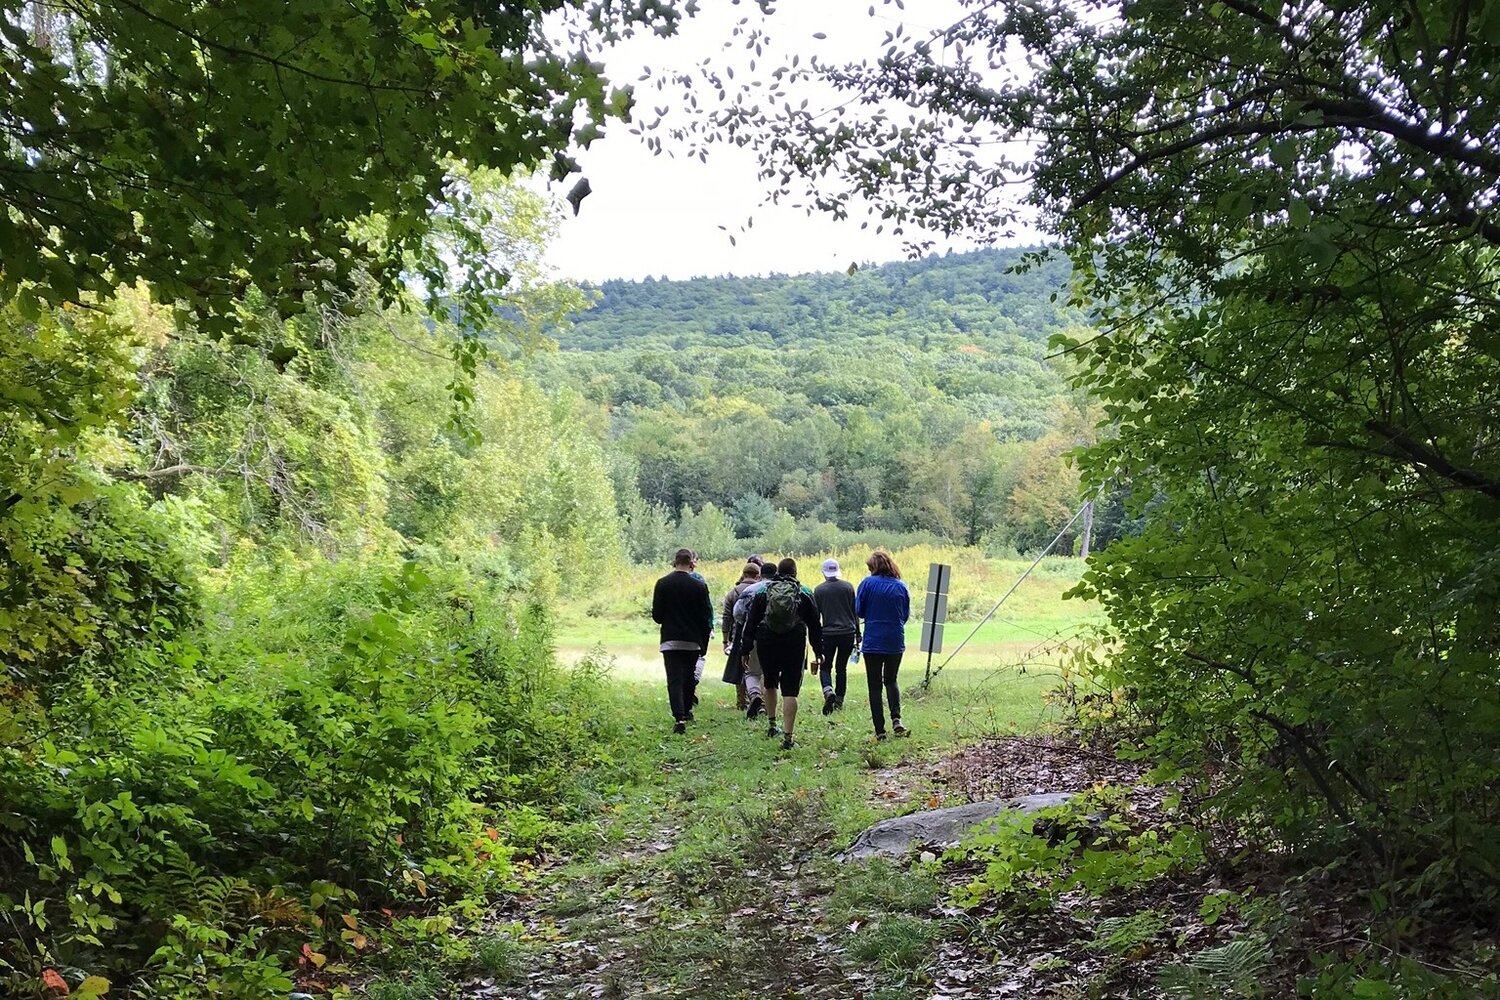  A group of five walks away from the camera between two large swaths of bushes and trees. A field can be seen at the end of the passageway made from the greenery. 